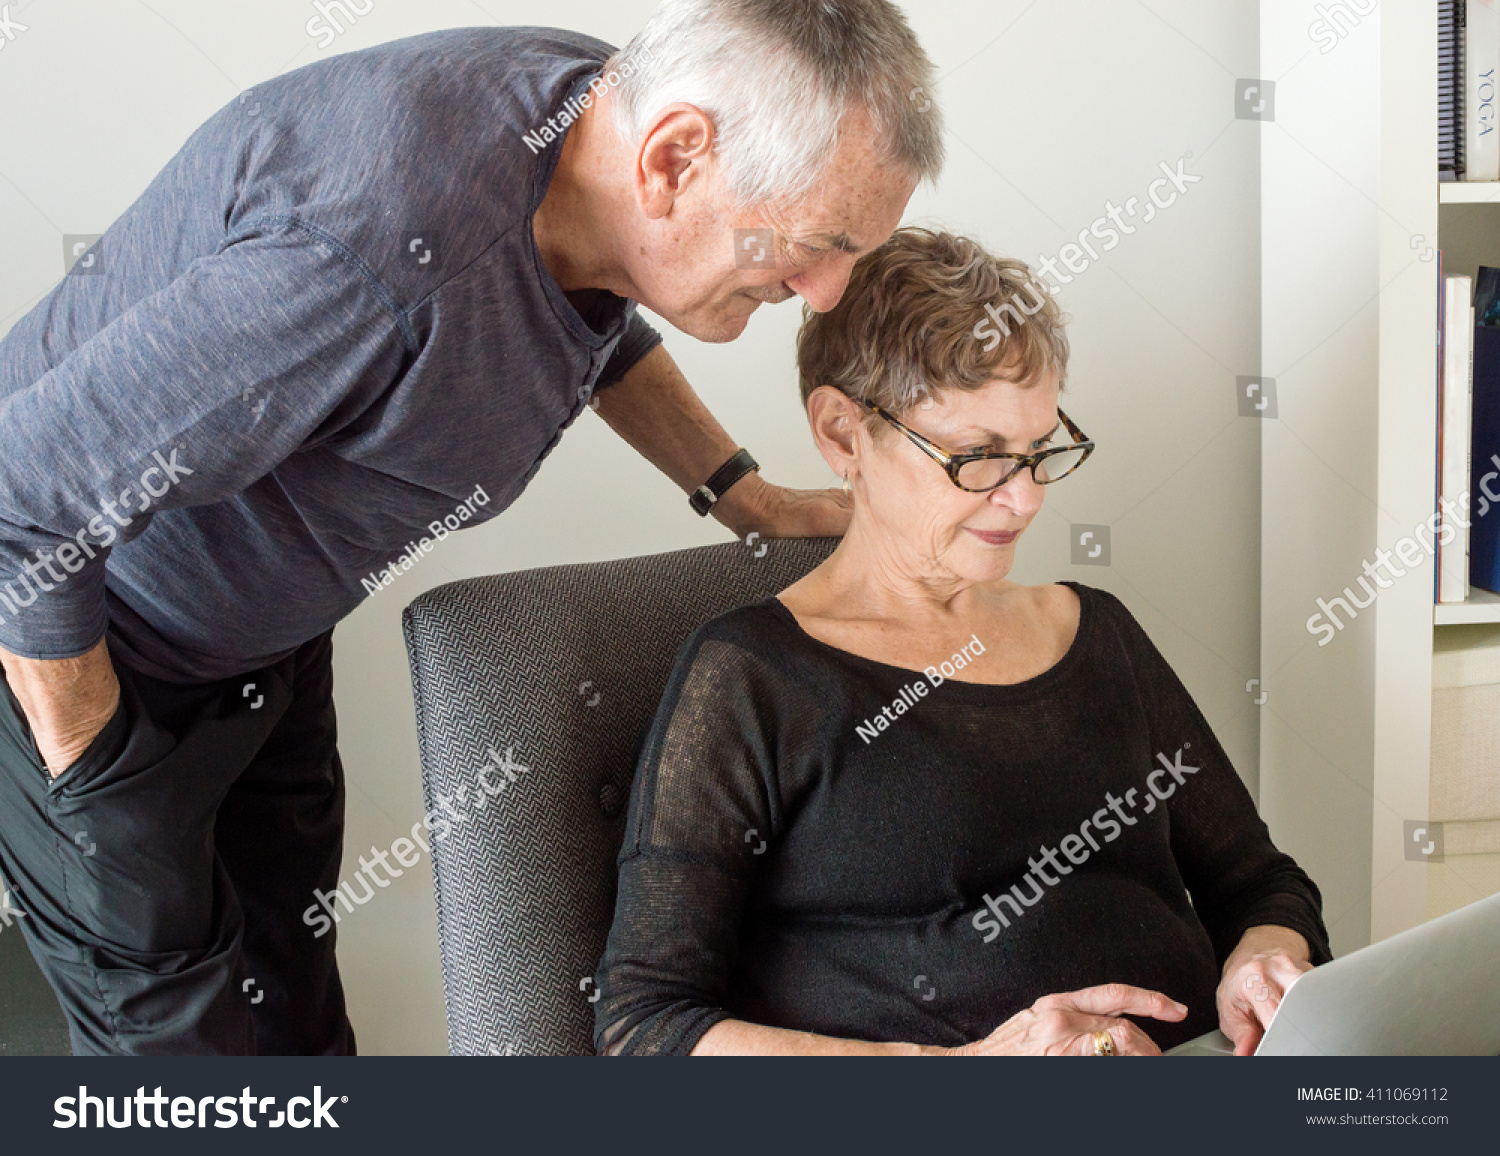 Older woman in black clothing seated using a computer with older man in dark clothing looking over her shoulder #411069112